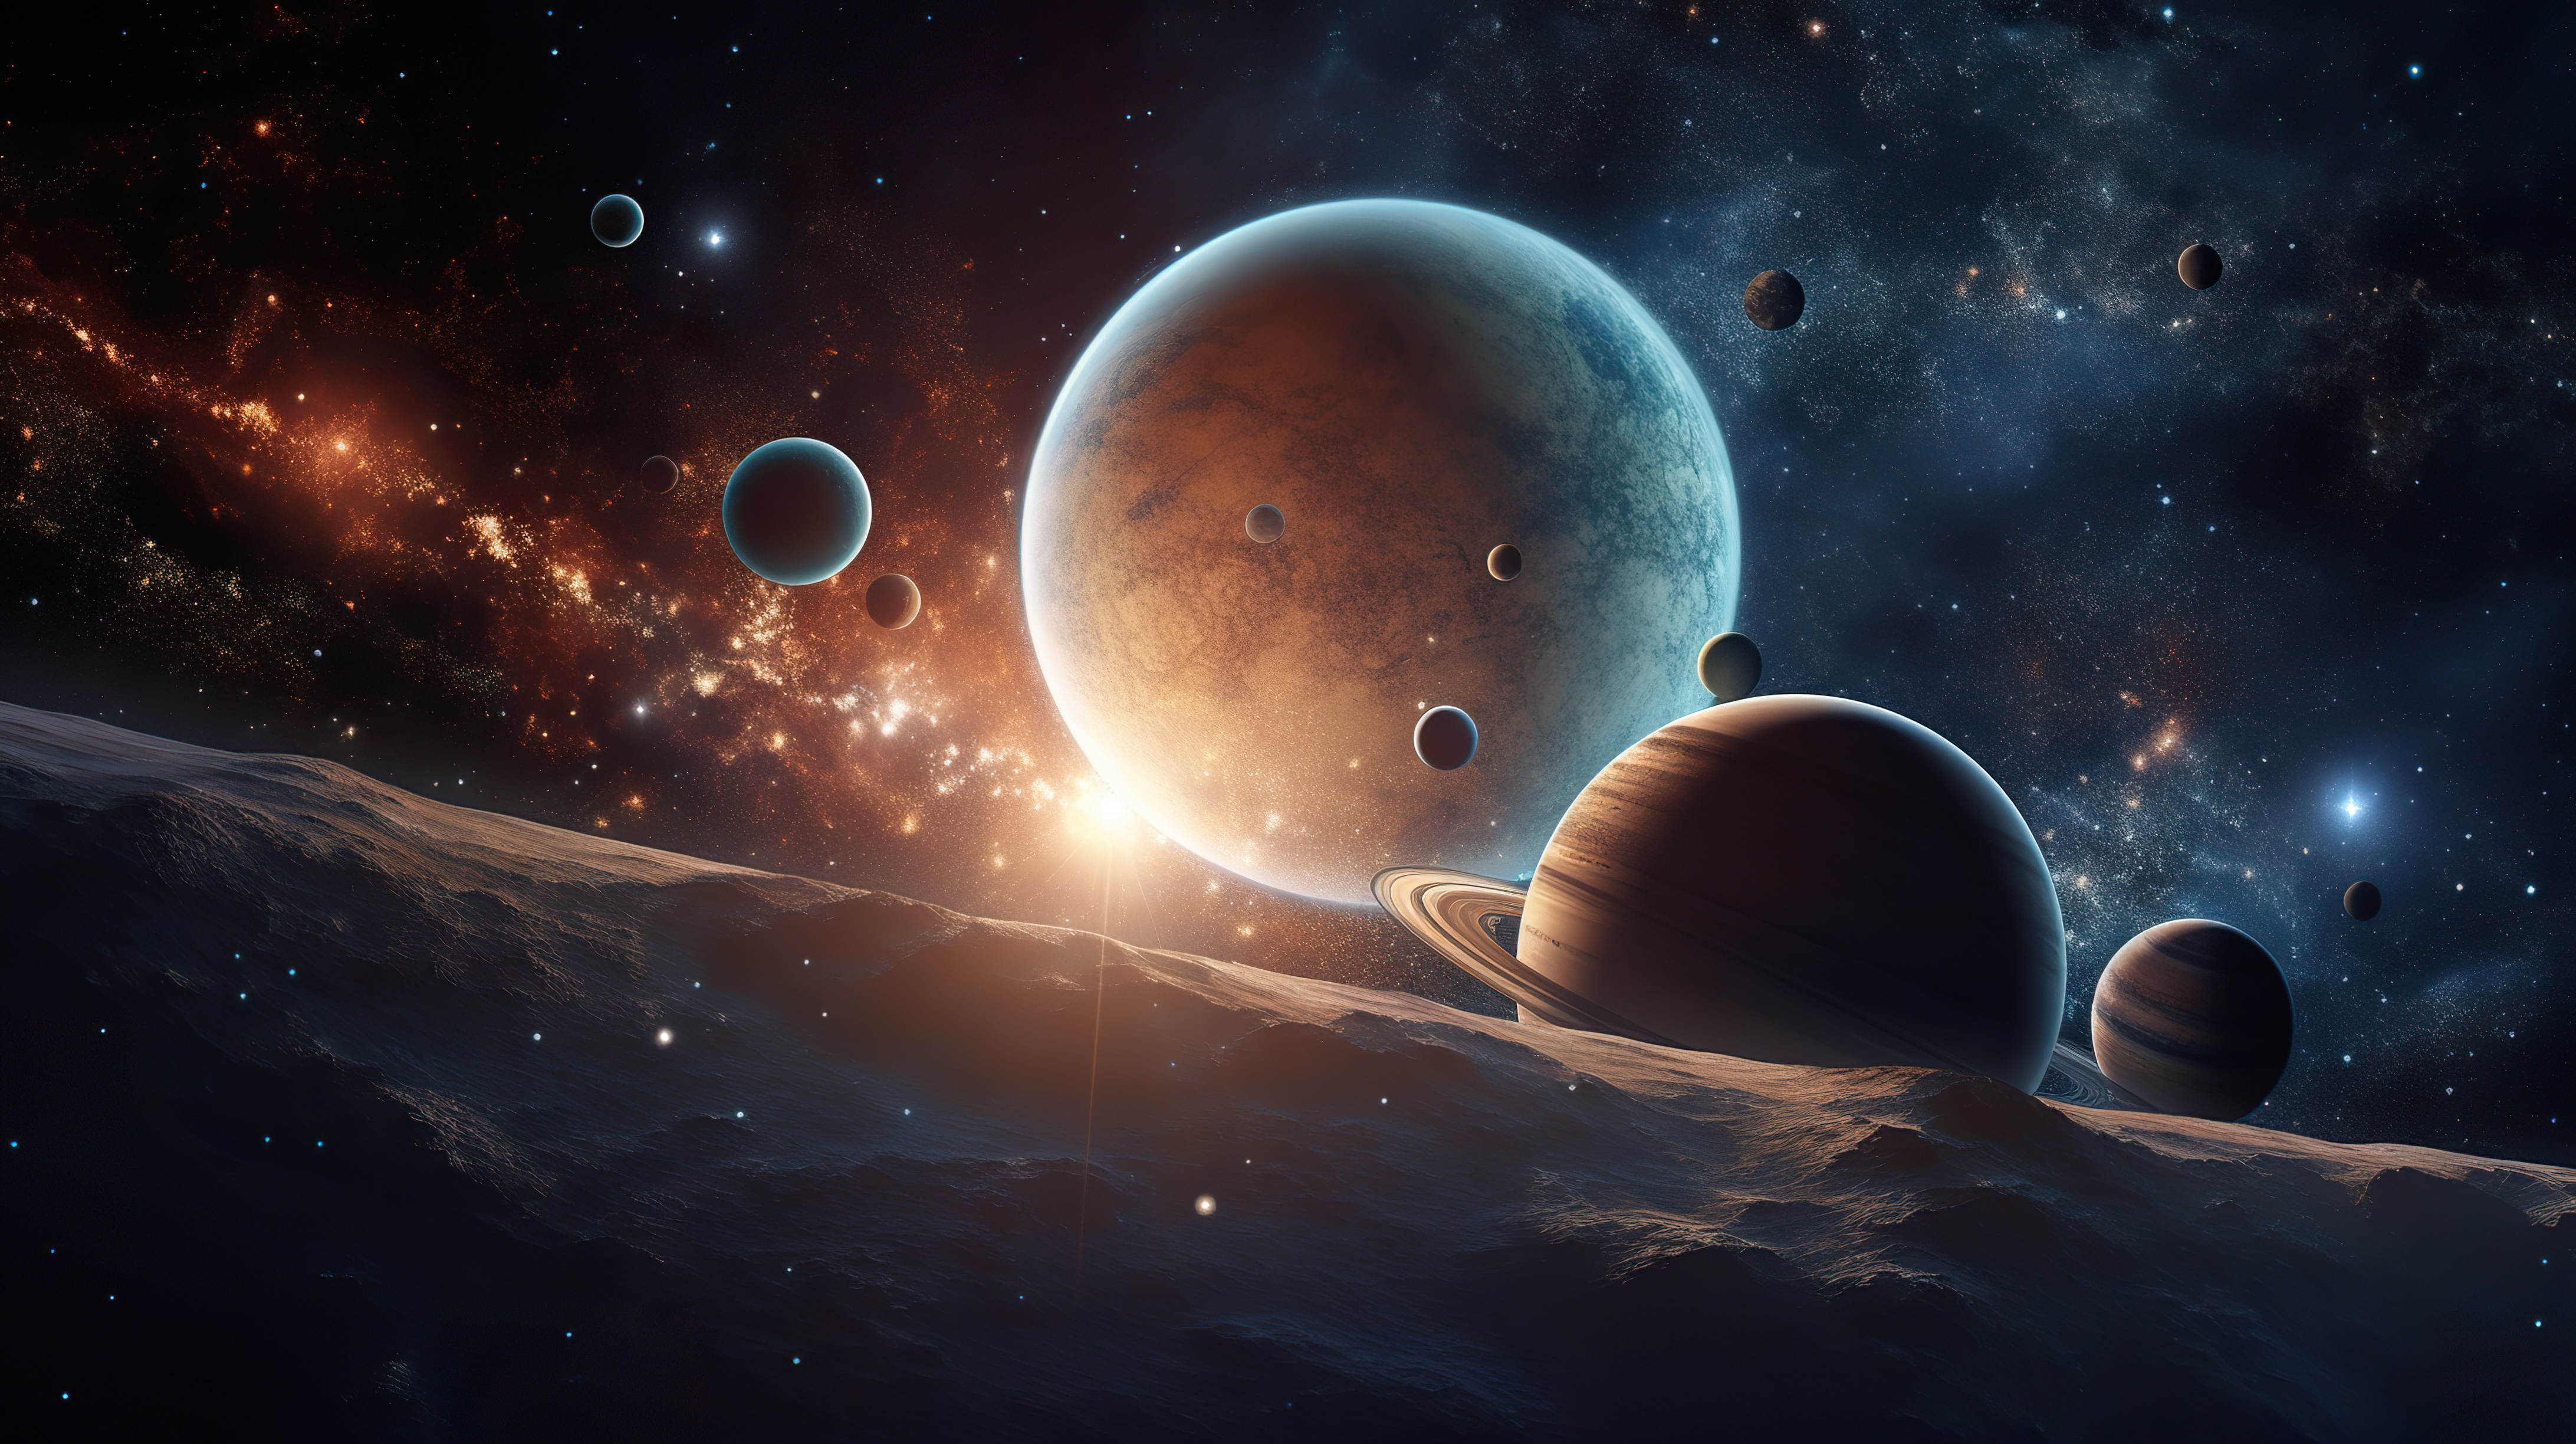 Celestial Scene with Planets, Stars and Galaxy